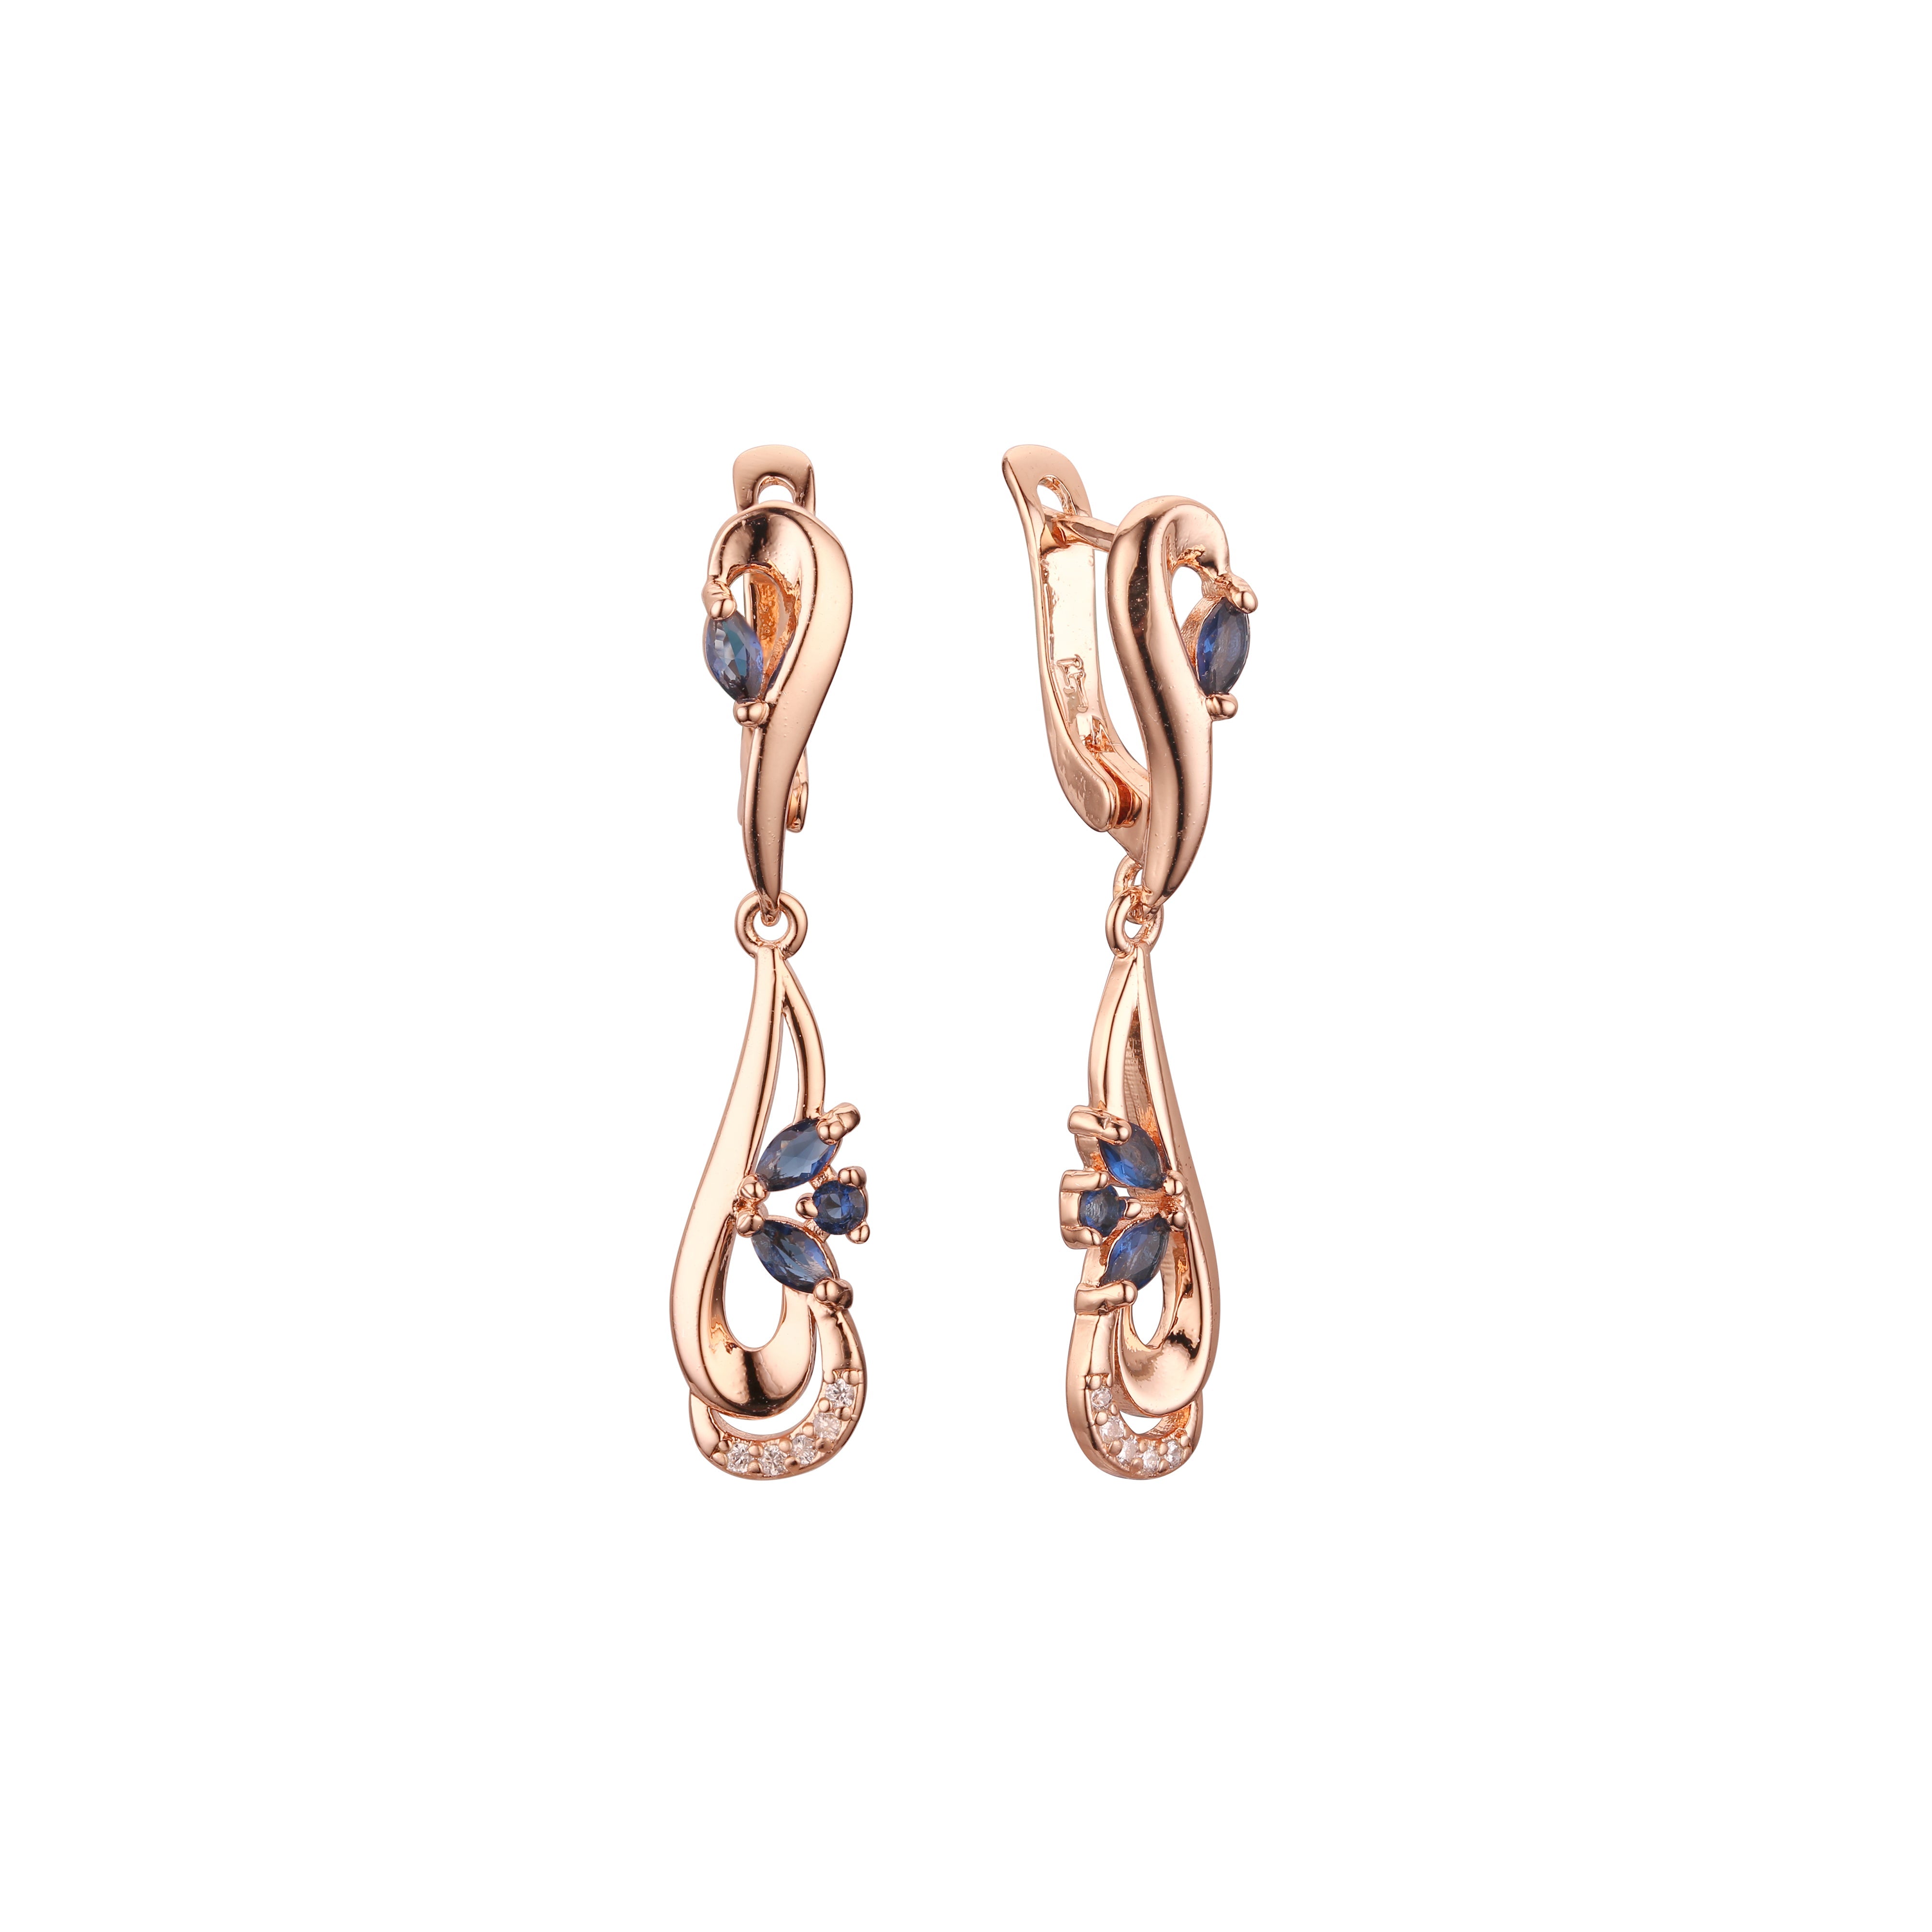 Earrings in Rose Gold, two tone plating colors